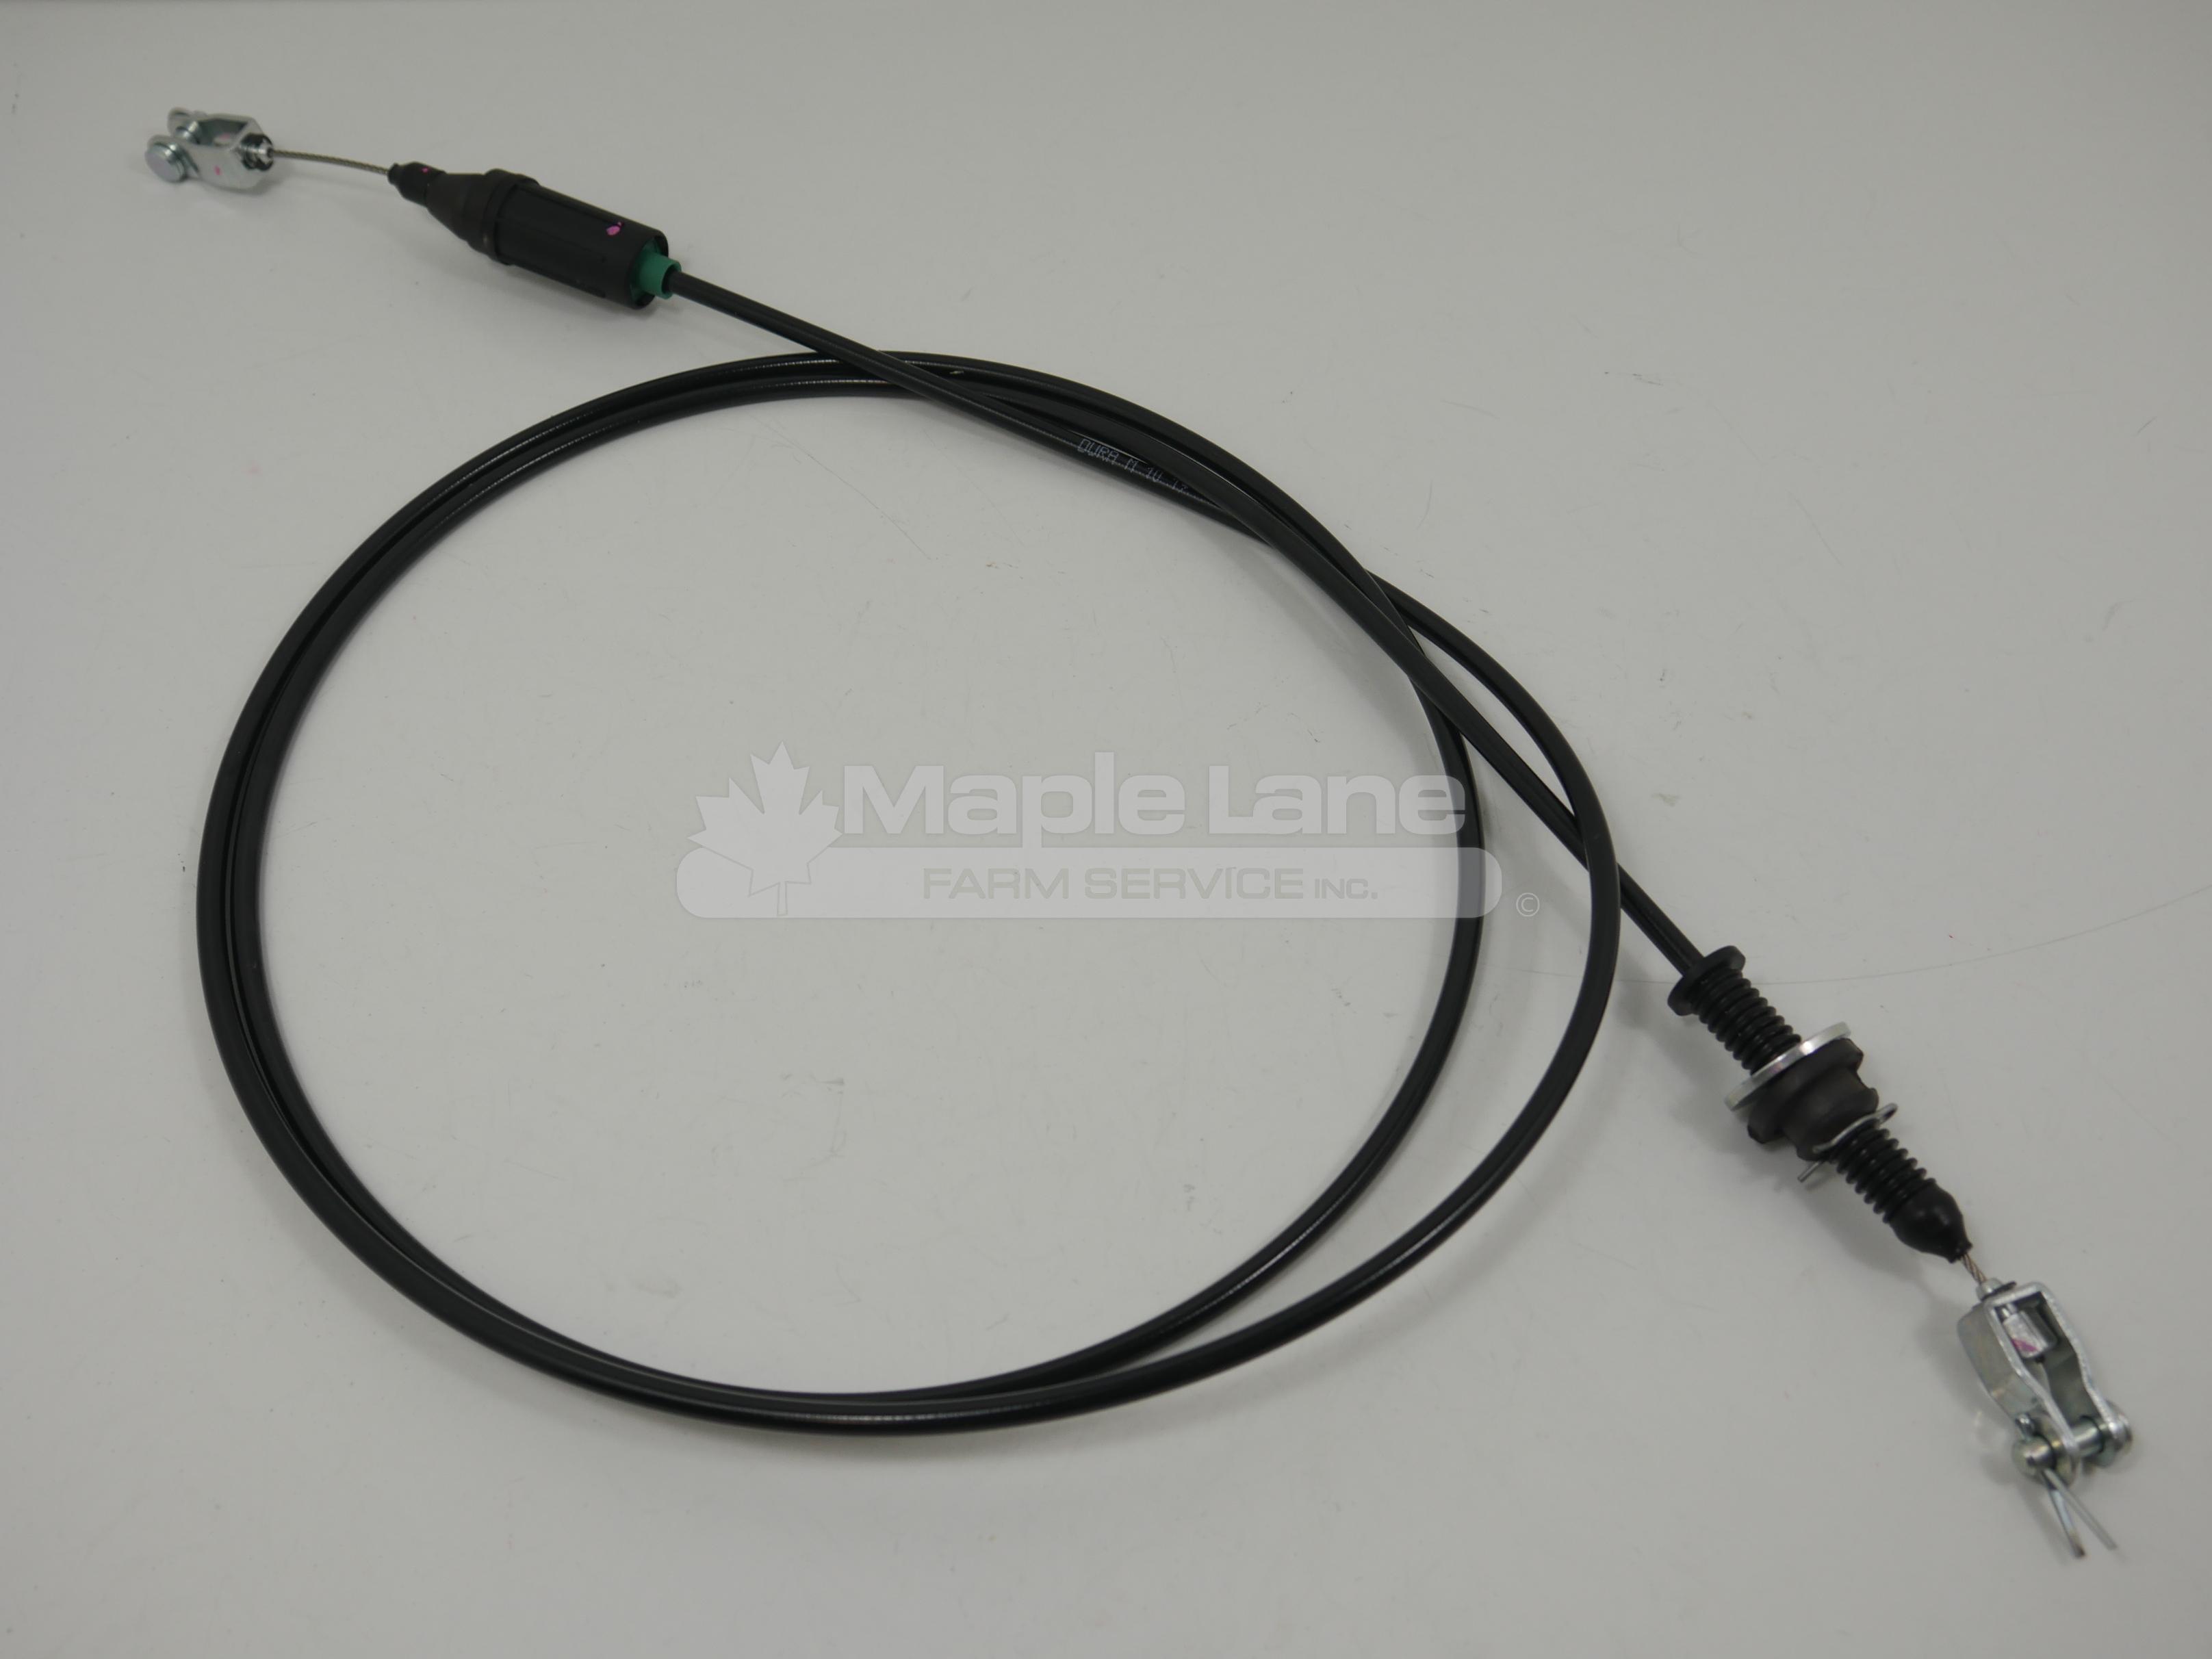 J260410 Cable